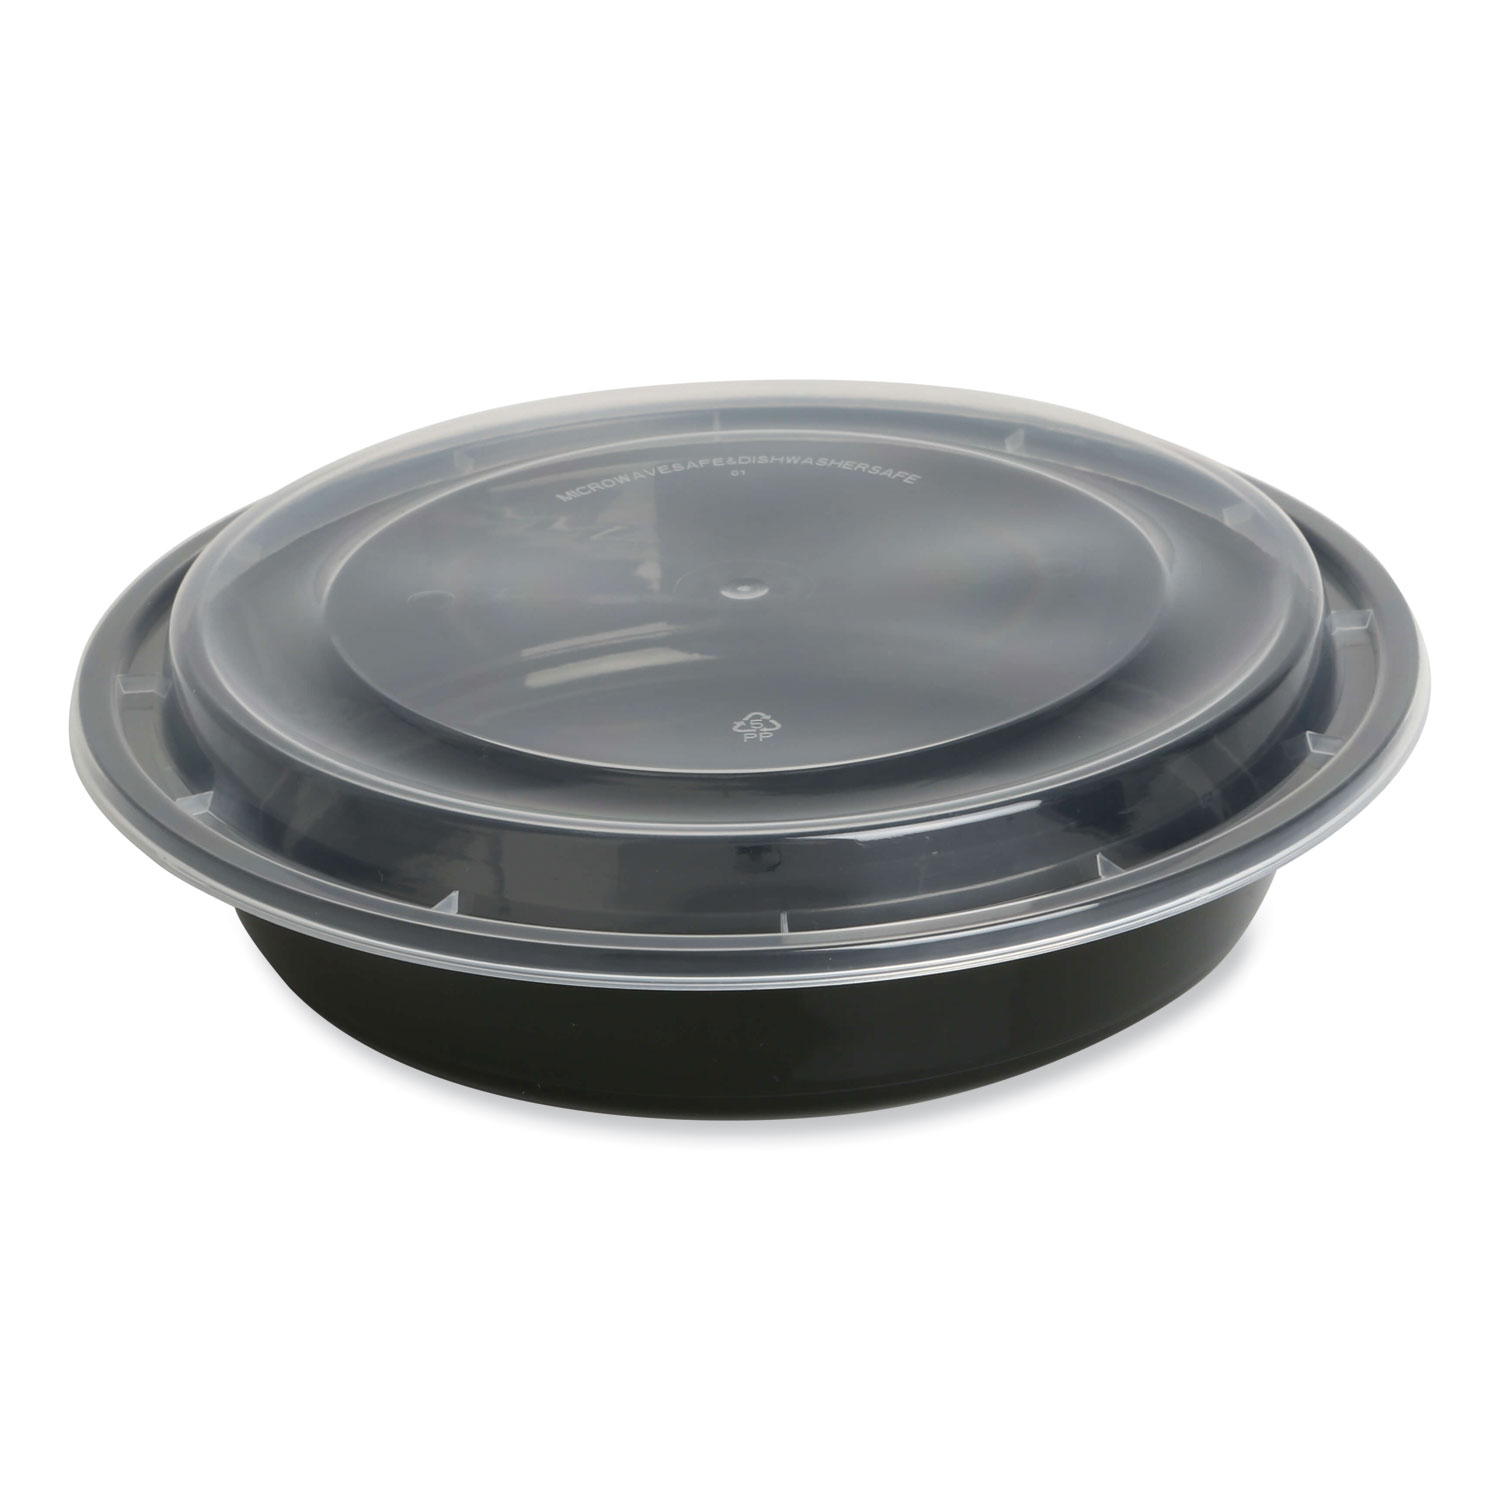 Plastic Round Hinged Lid Containers Clear, White, Black, 1/6 - 11 oz